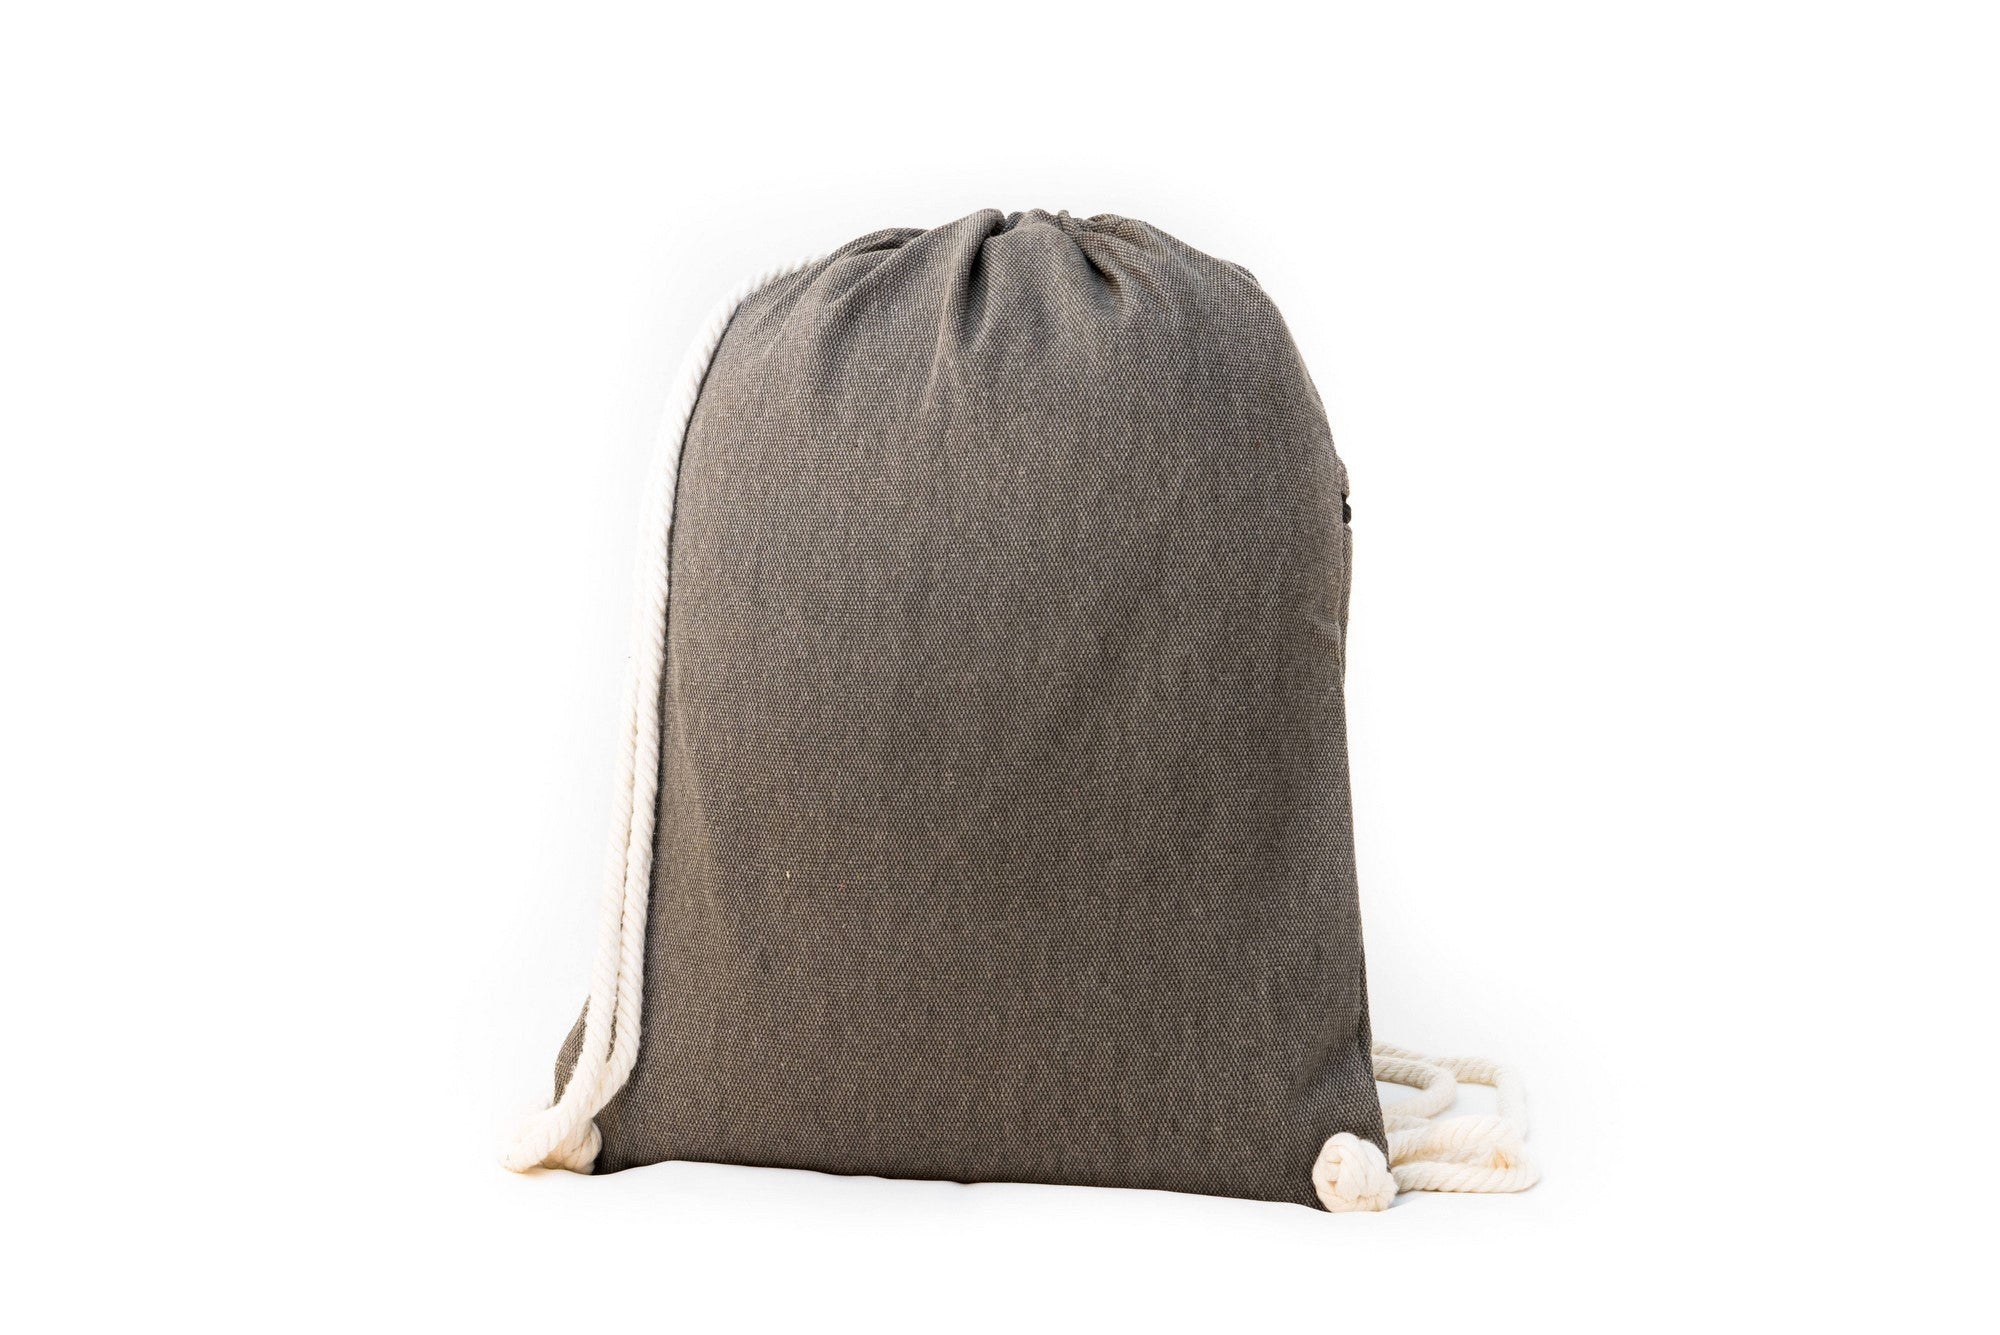 Drawstring Backpack - Drawstring Backpack - Canvas Cinch Daypack Sackpack By Lemur Bags (Stone Gray)